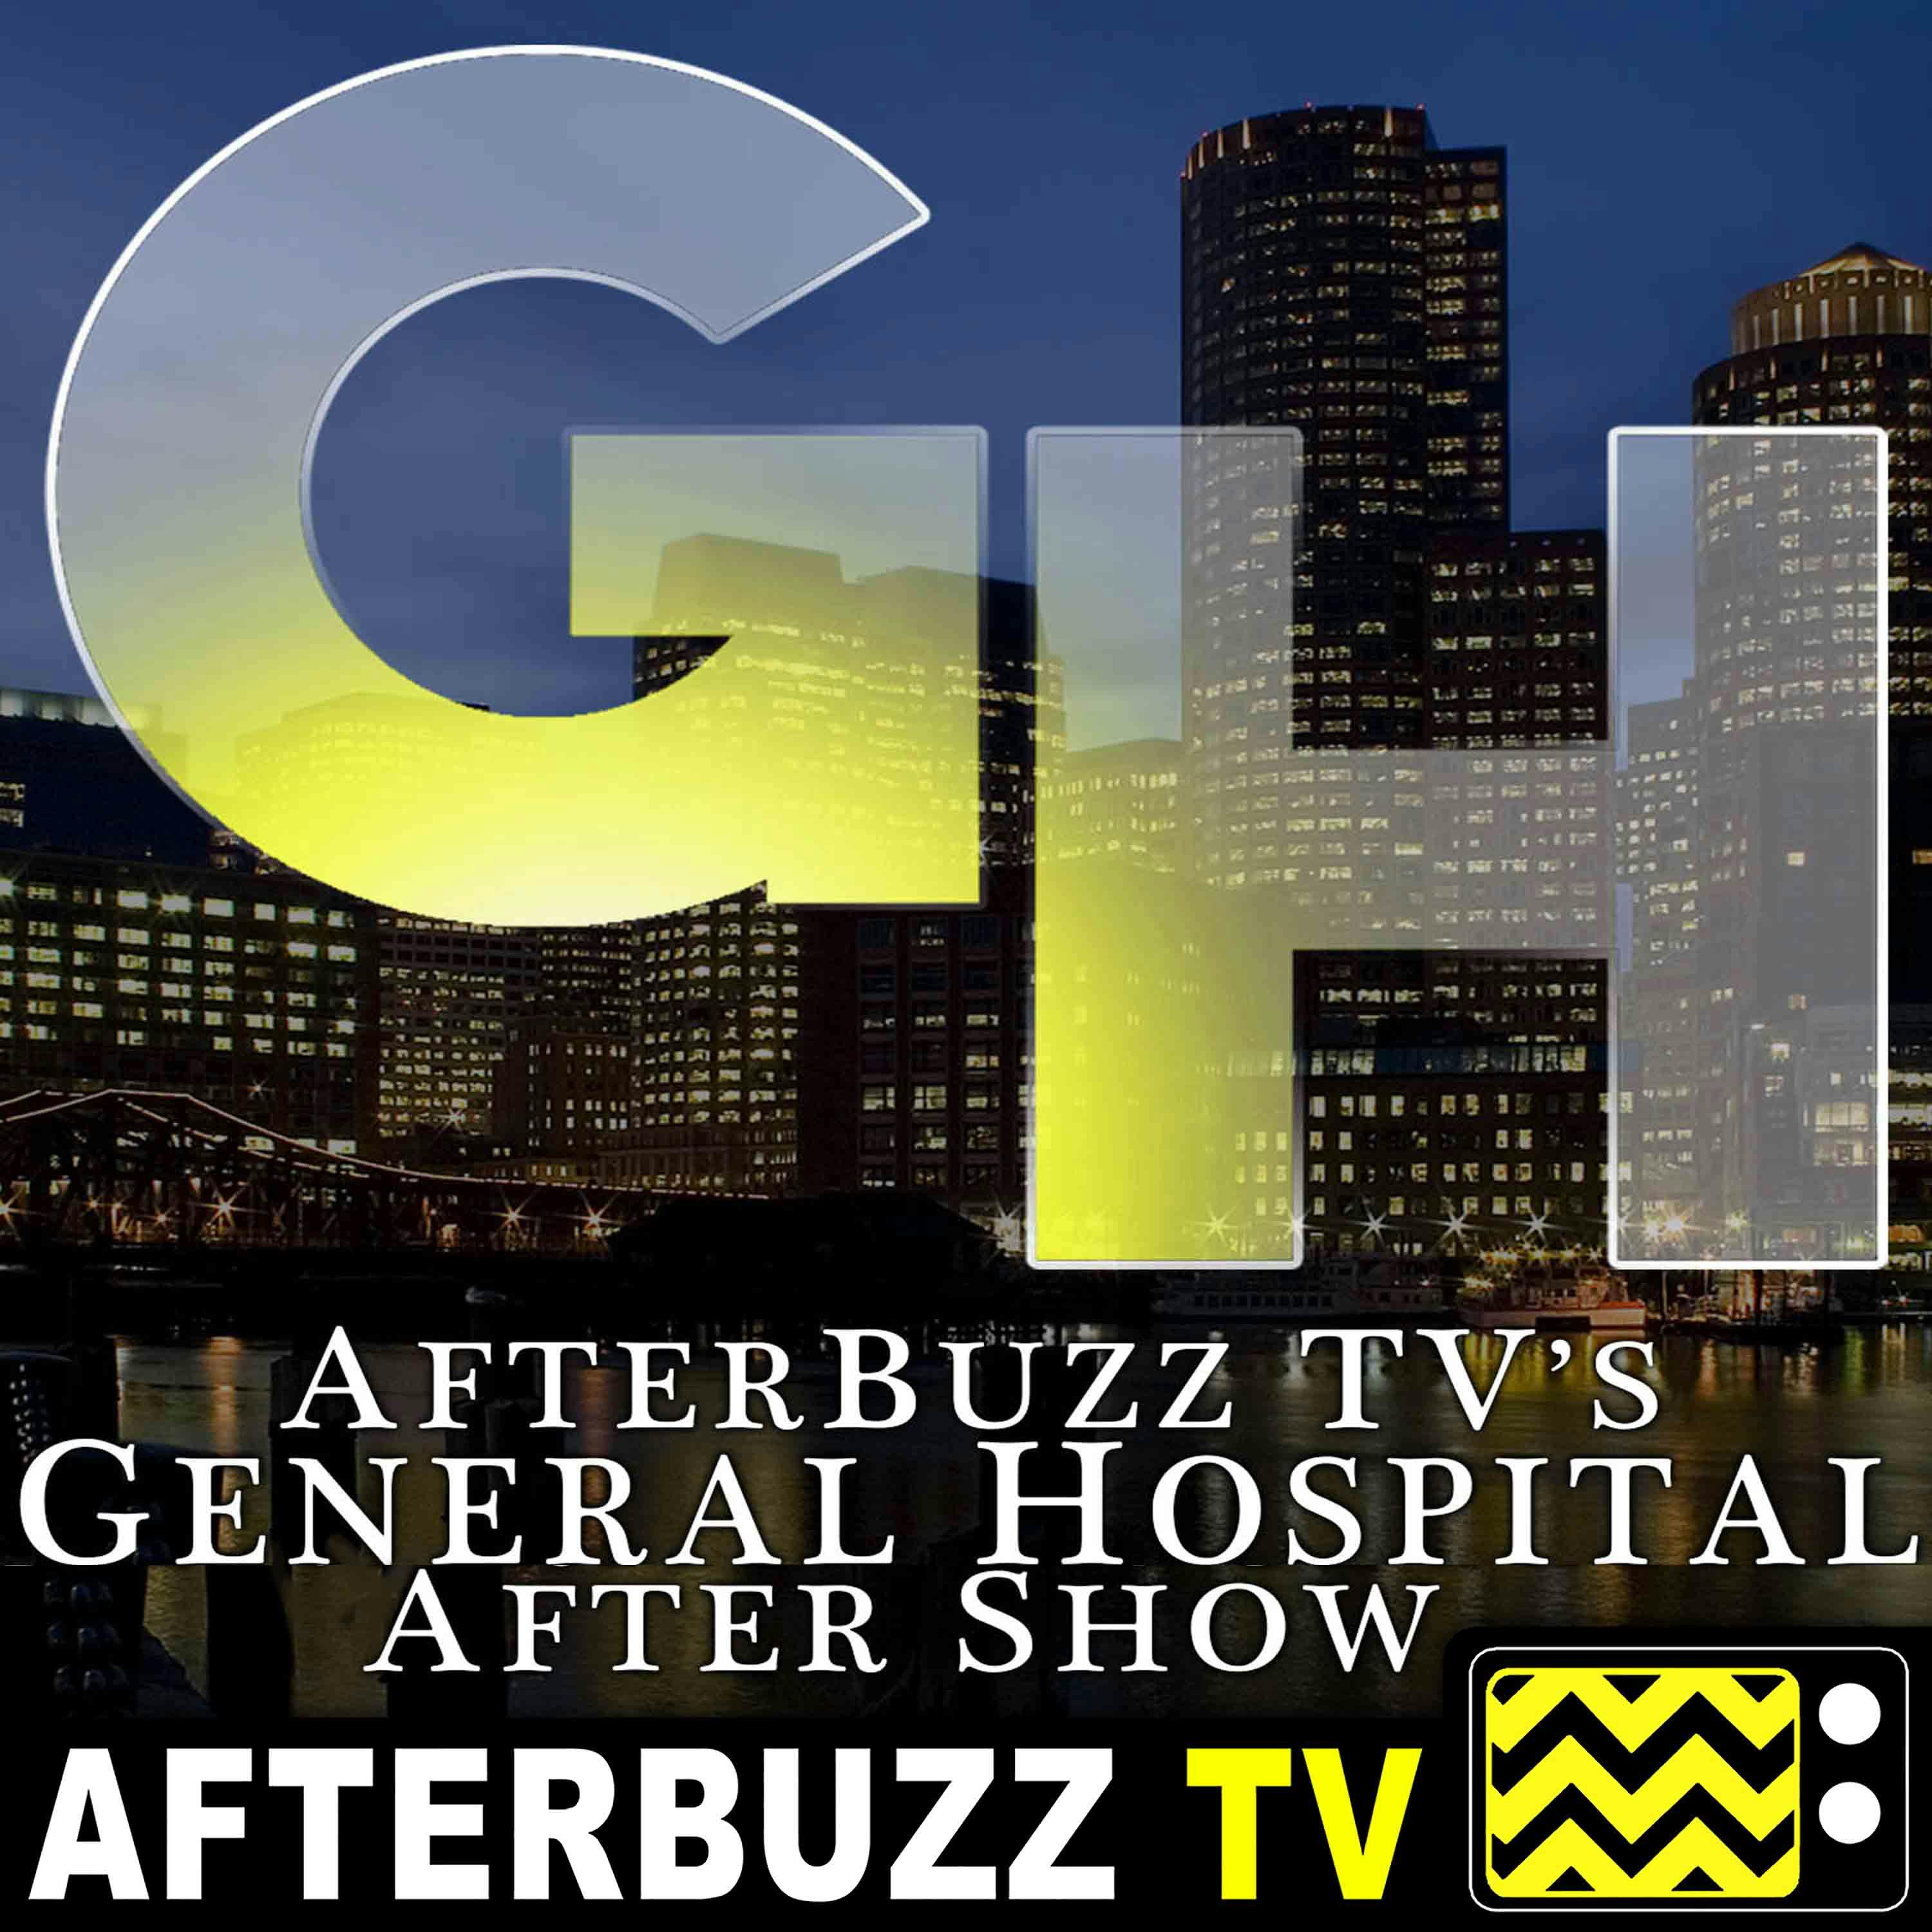 'March 25th - March 29th, 2019' Review Of General Hospital